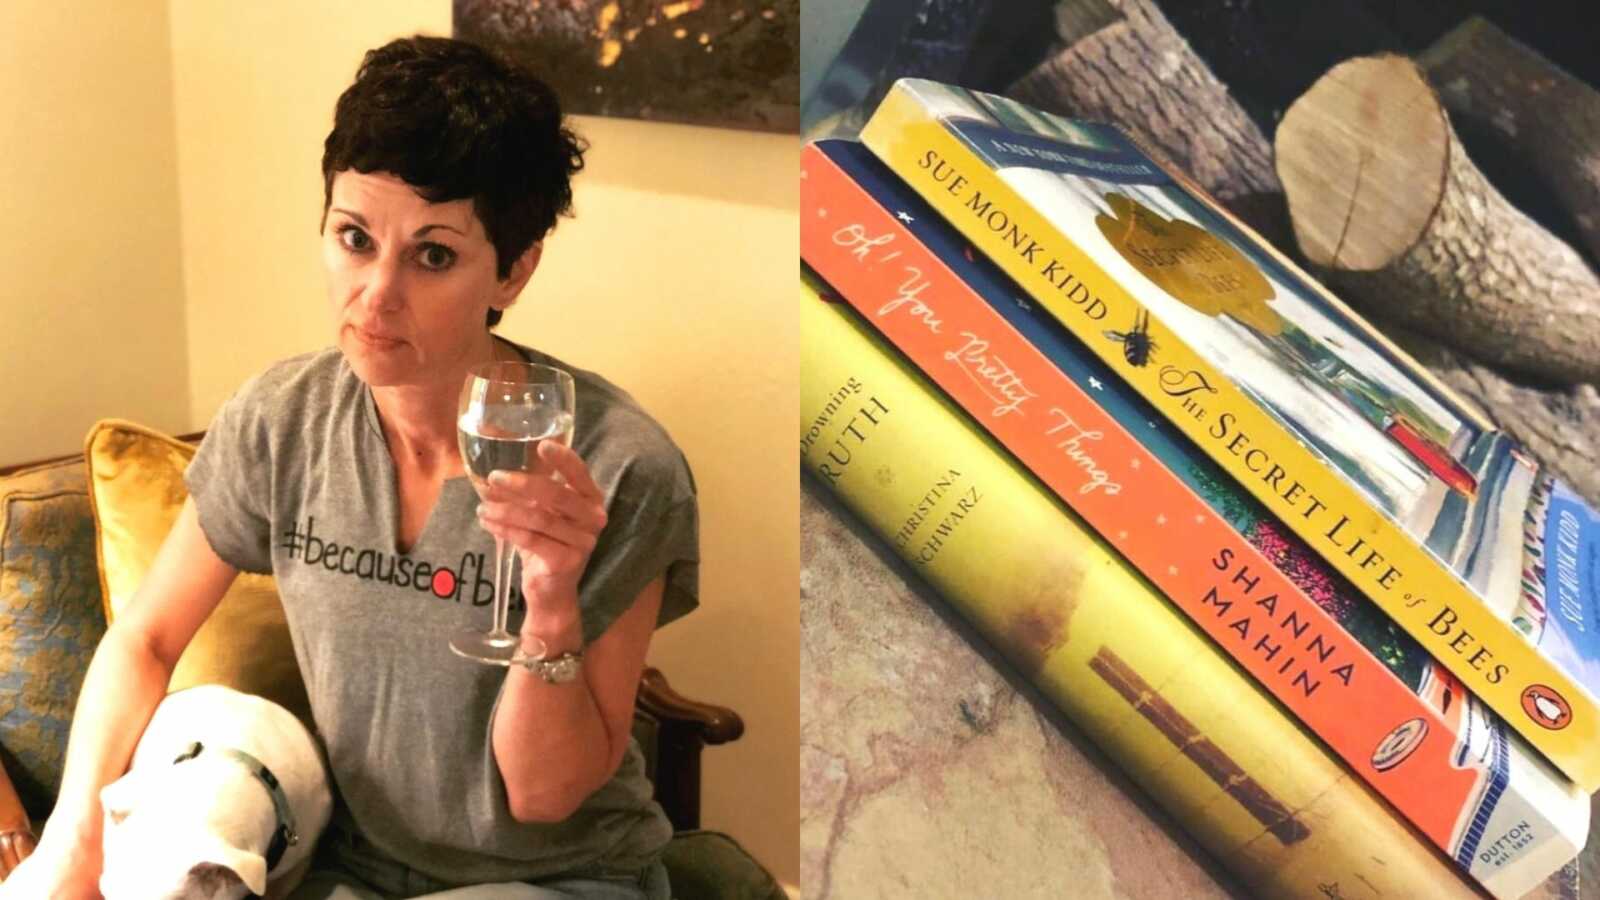 A woman sits with her dog and a glass of water, and a pile of books